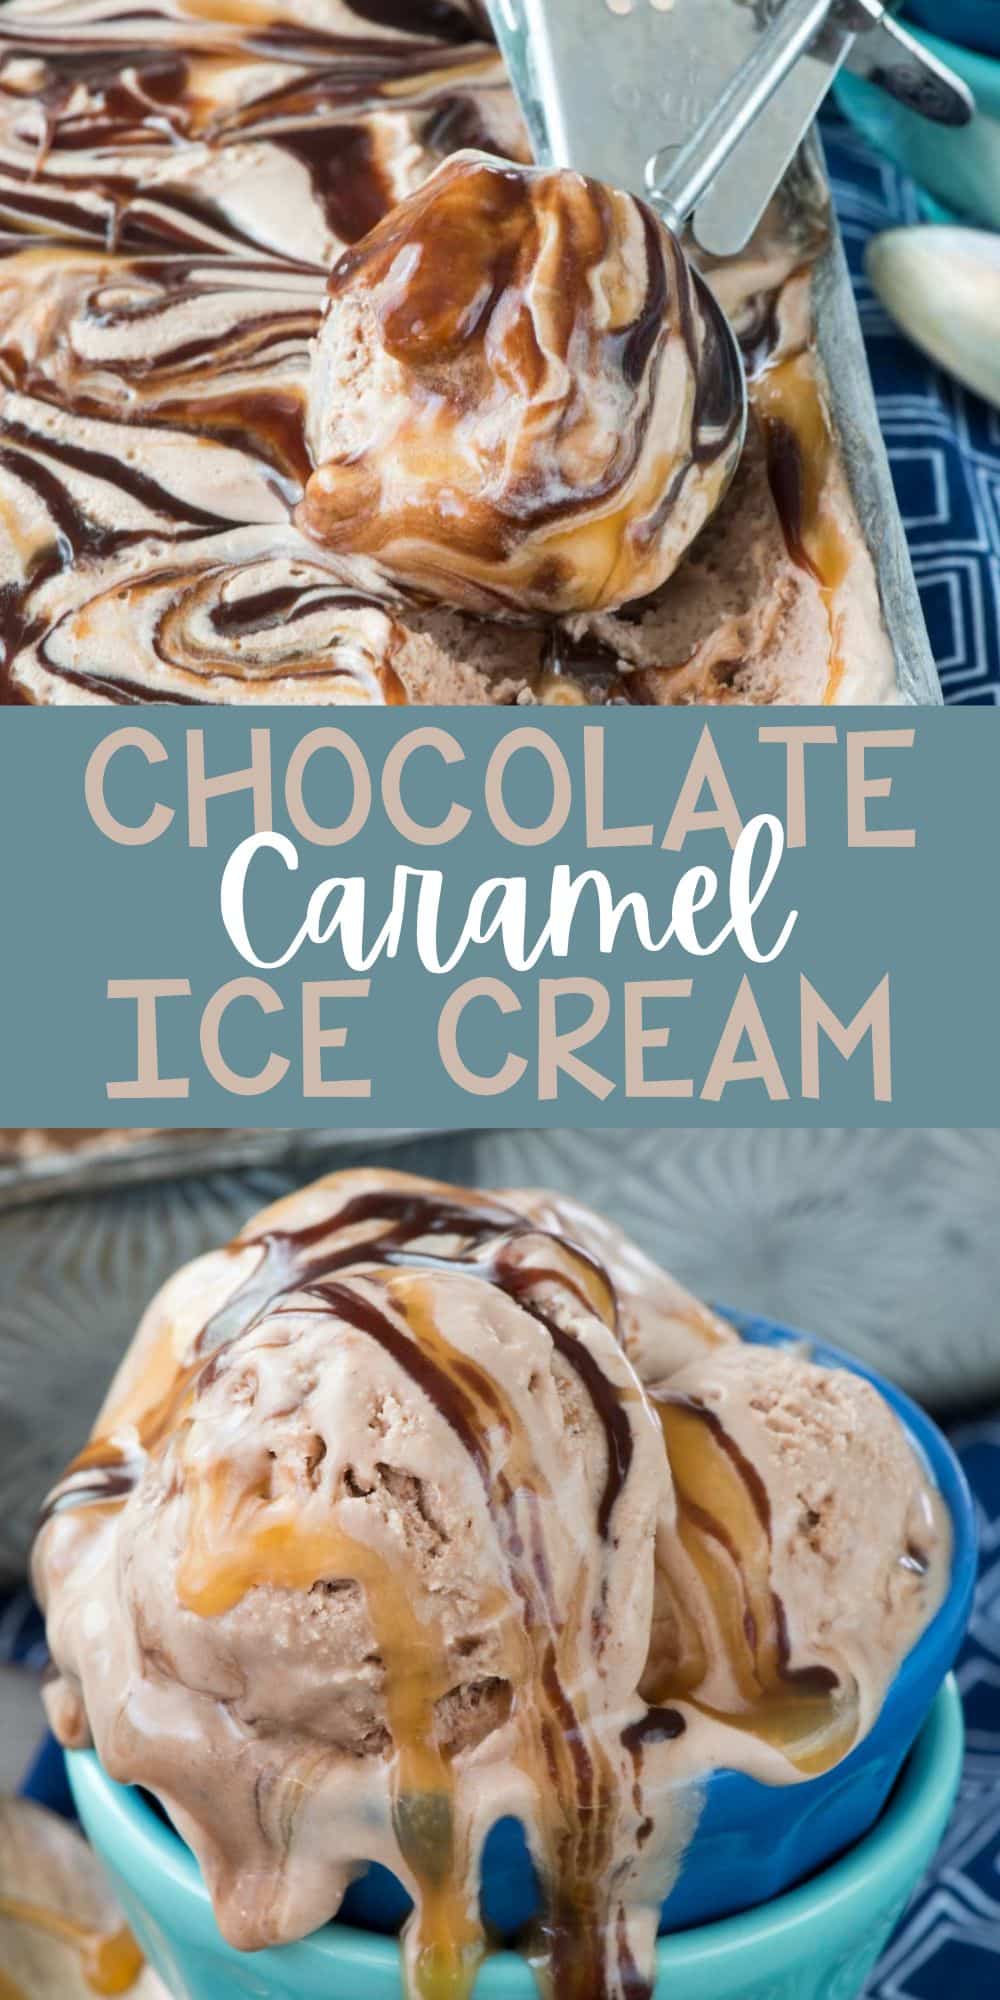 two photos of ice cream swirled with chocolate and caramel sauce with words on the image.